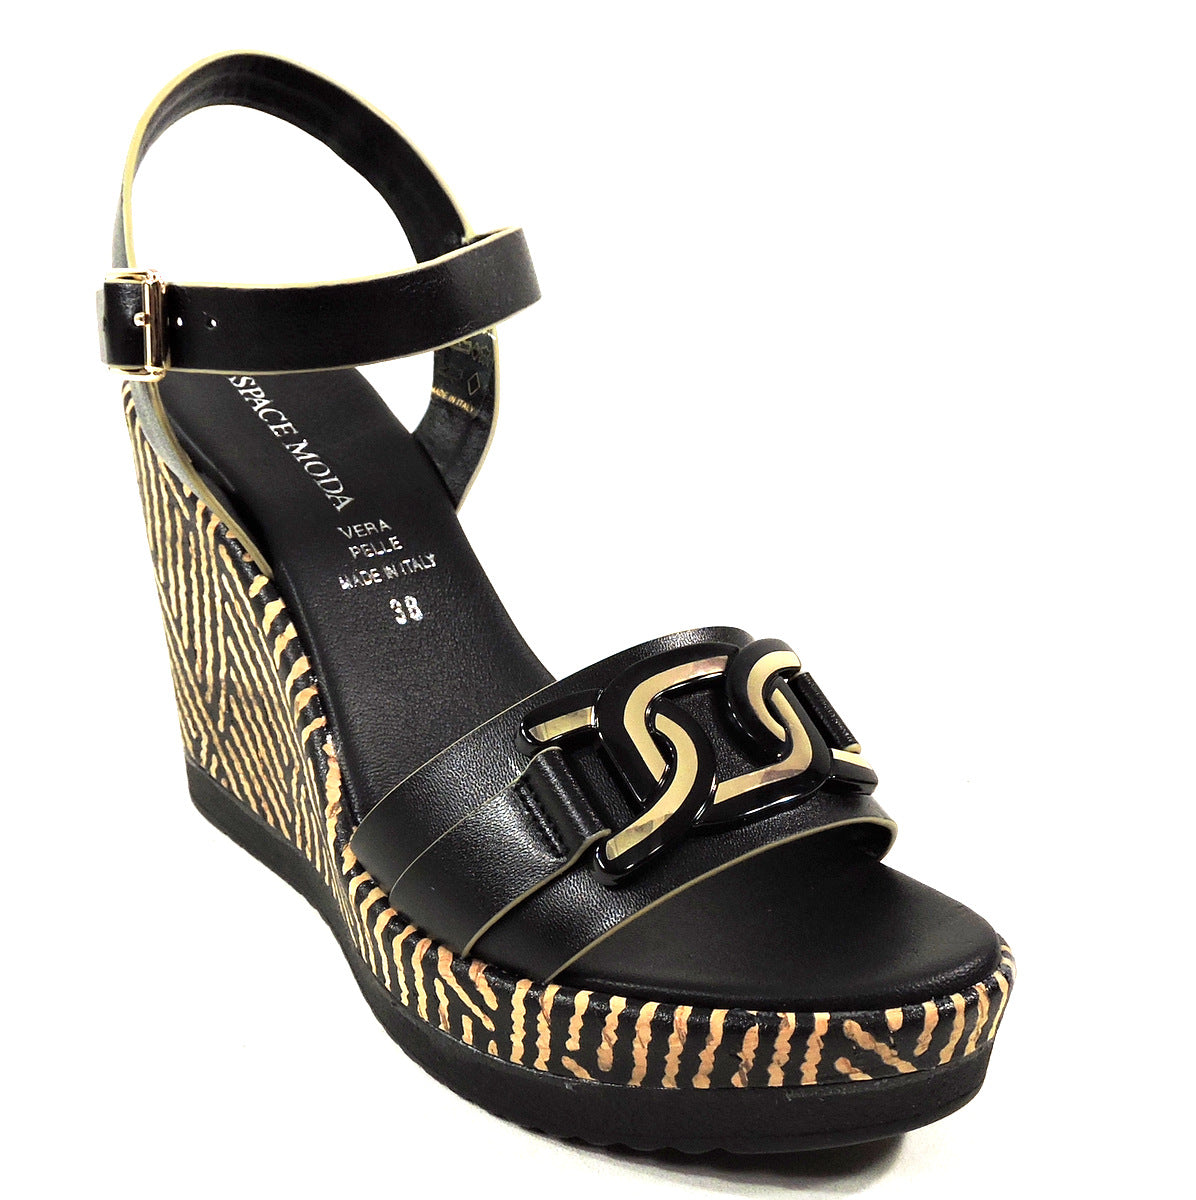 SPACE MODA PHIL GATIÈR BY REPO 🇮🇹 WOMENS BLACK LEATHER COMFORT WEDGED SANDALS